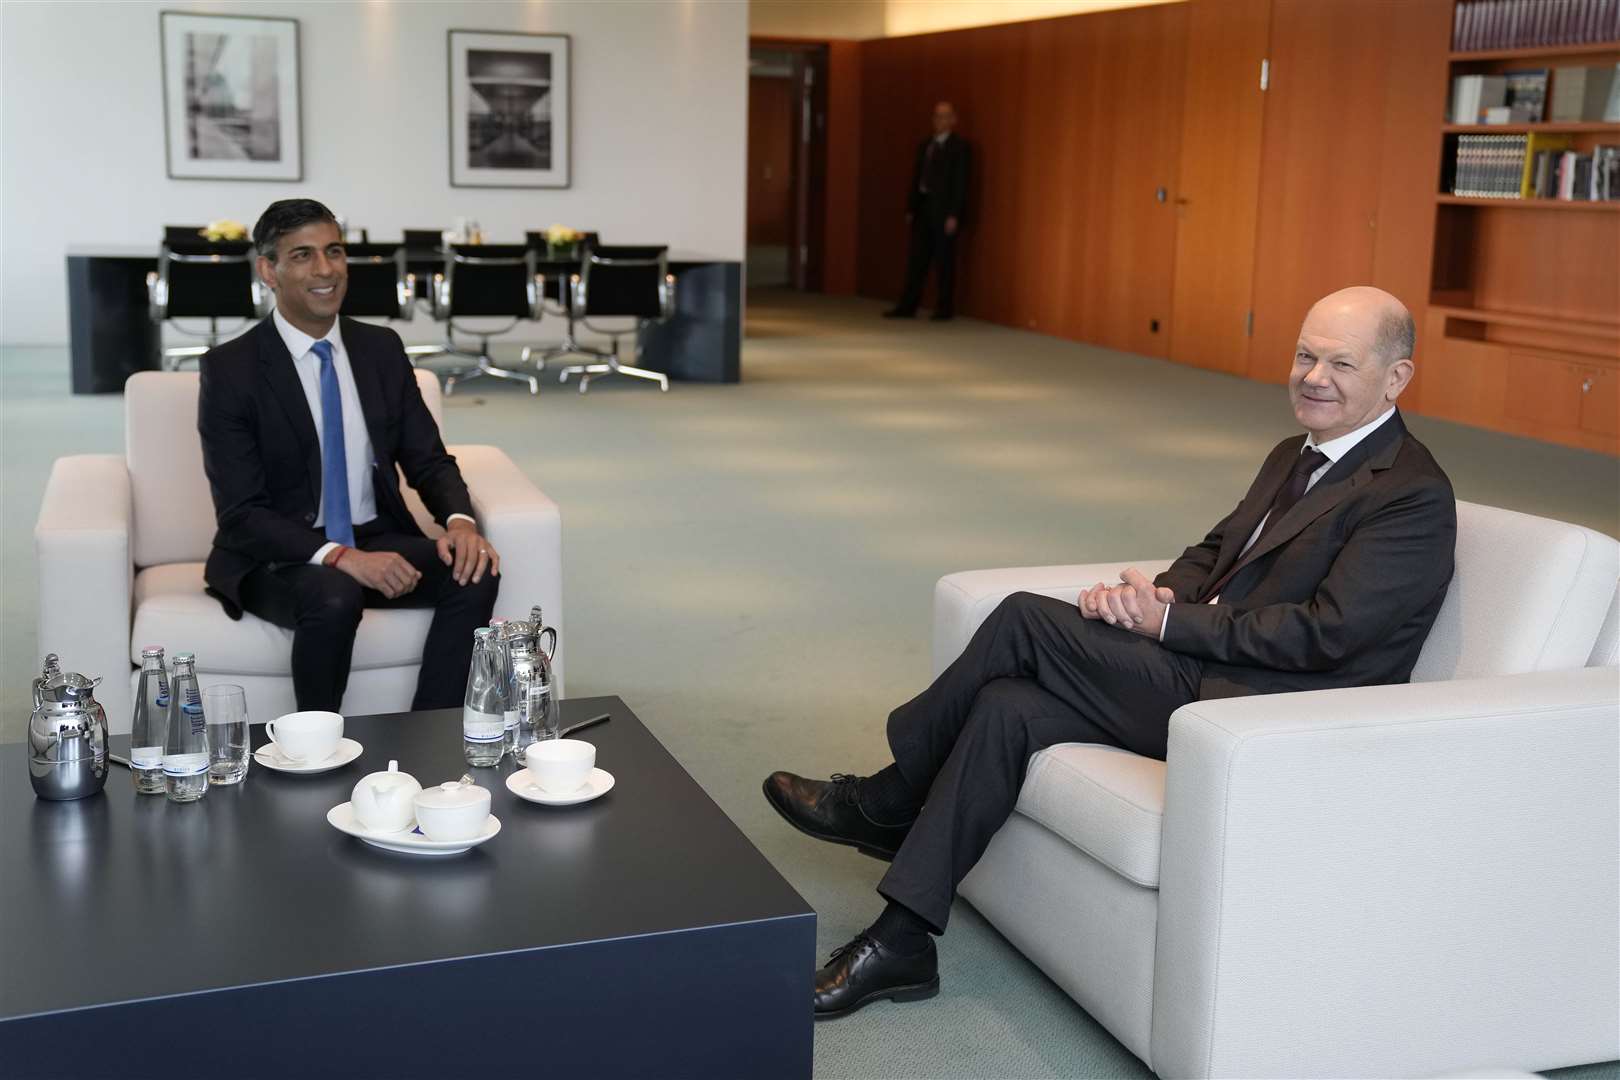 Prime Minister Rishi Sunak and Germany’s Chancellor Olaf Scholz at the Chancellery (Alastair Grant/PA)